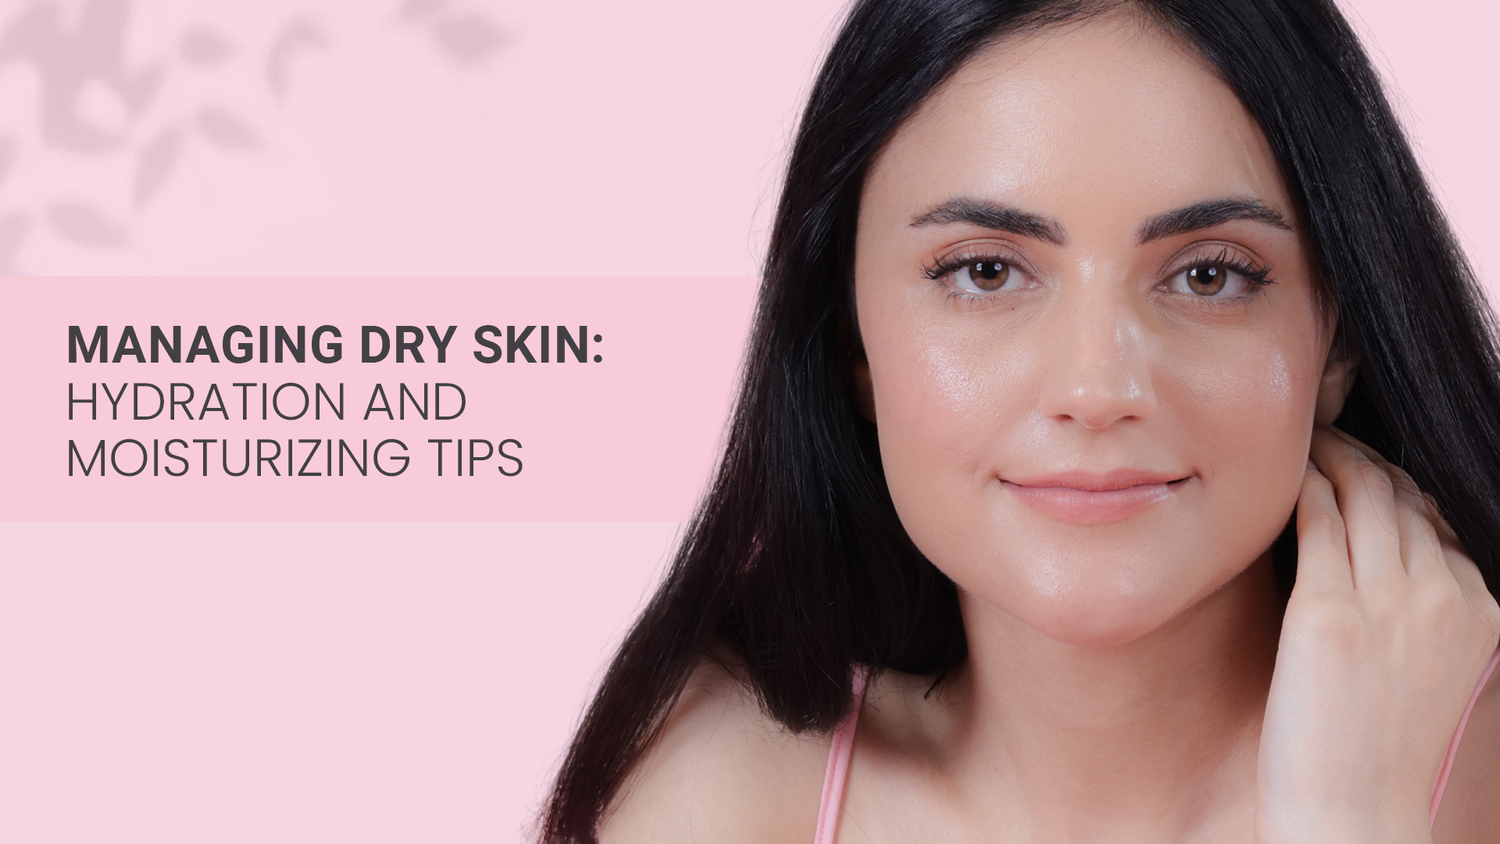 Managing Dry Skin: Hydration and Moisturizing Tips